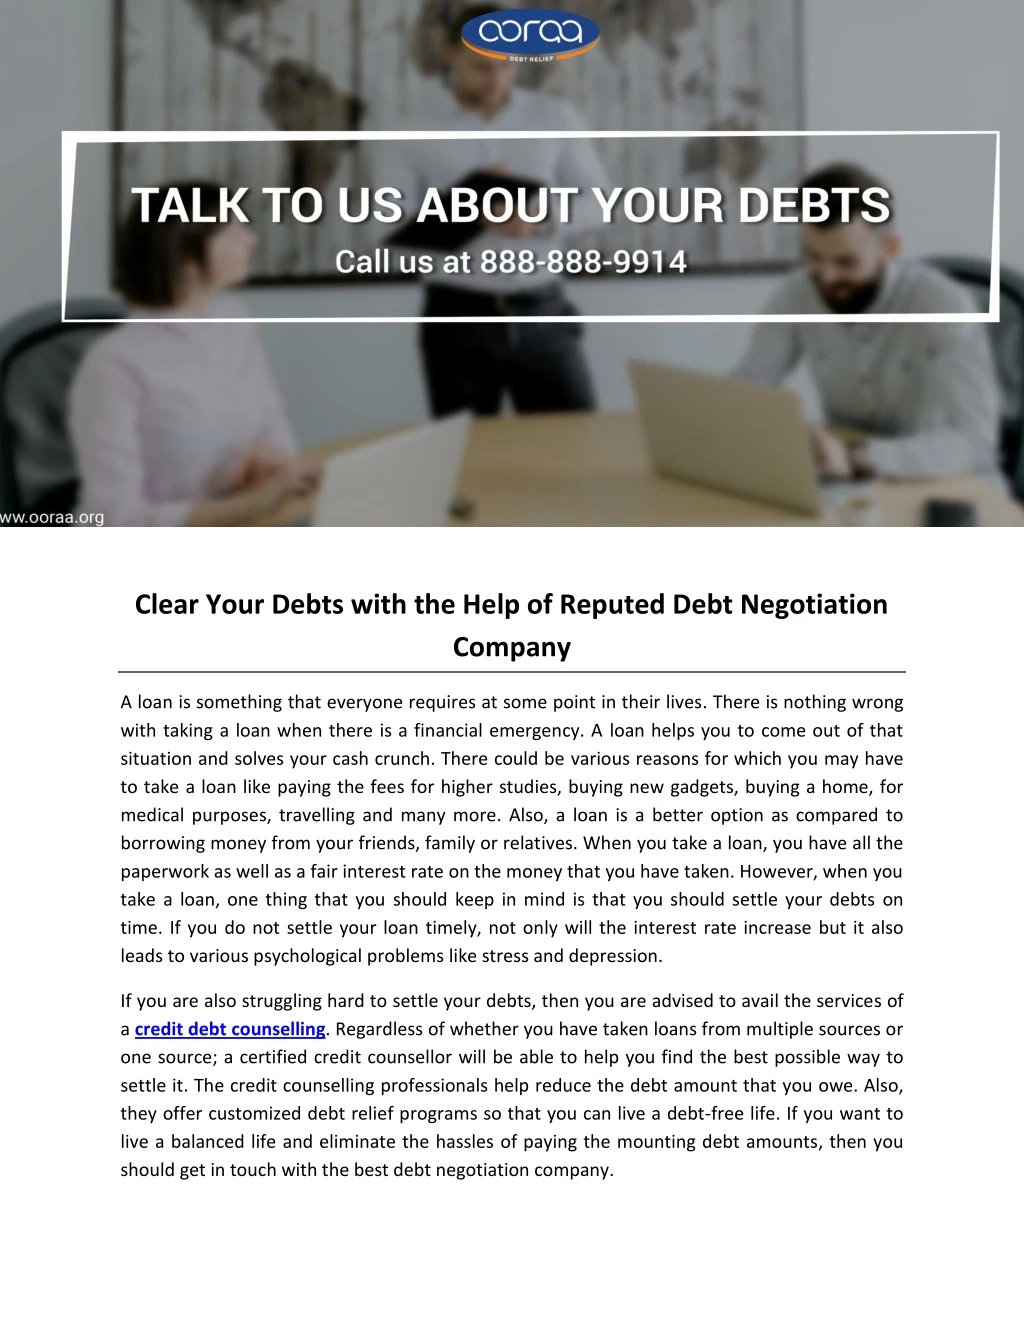 clear your debts with the help of reputed debt